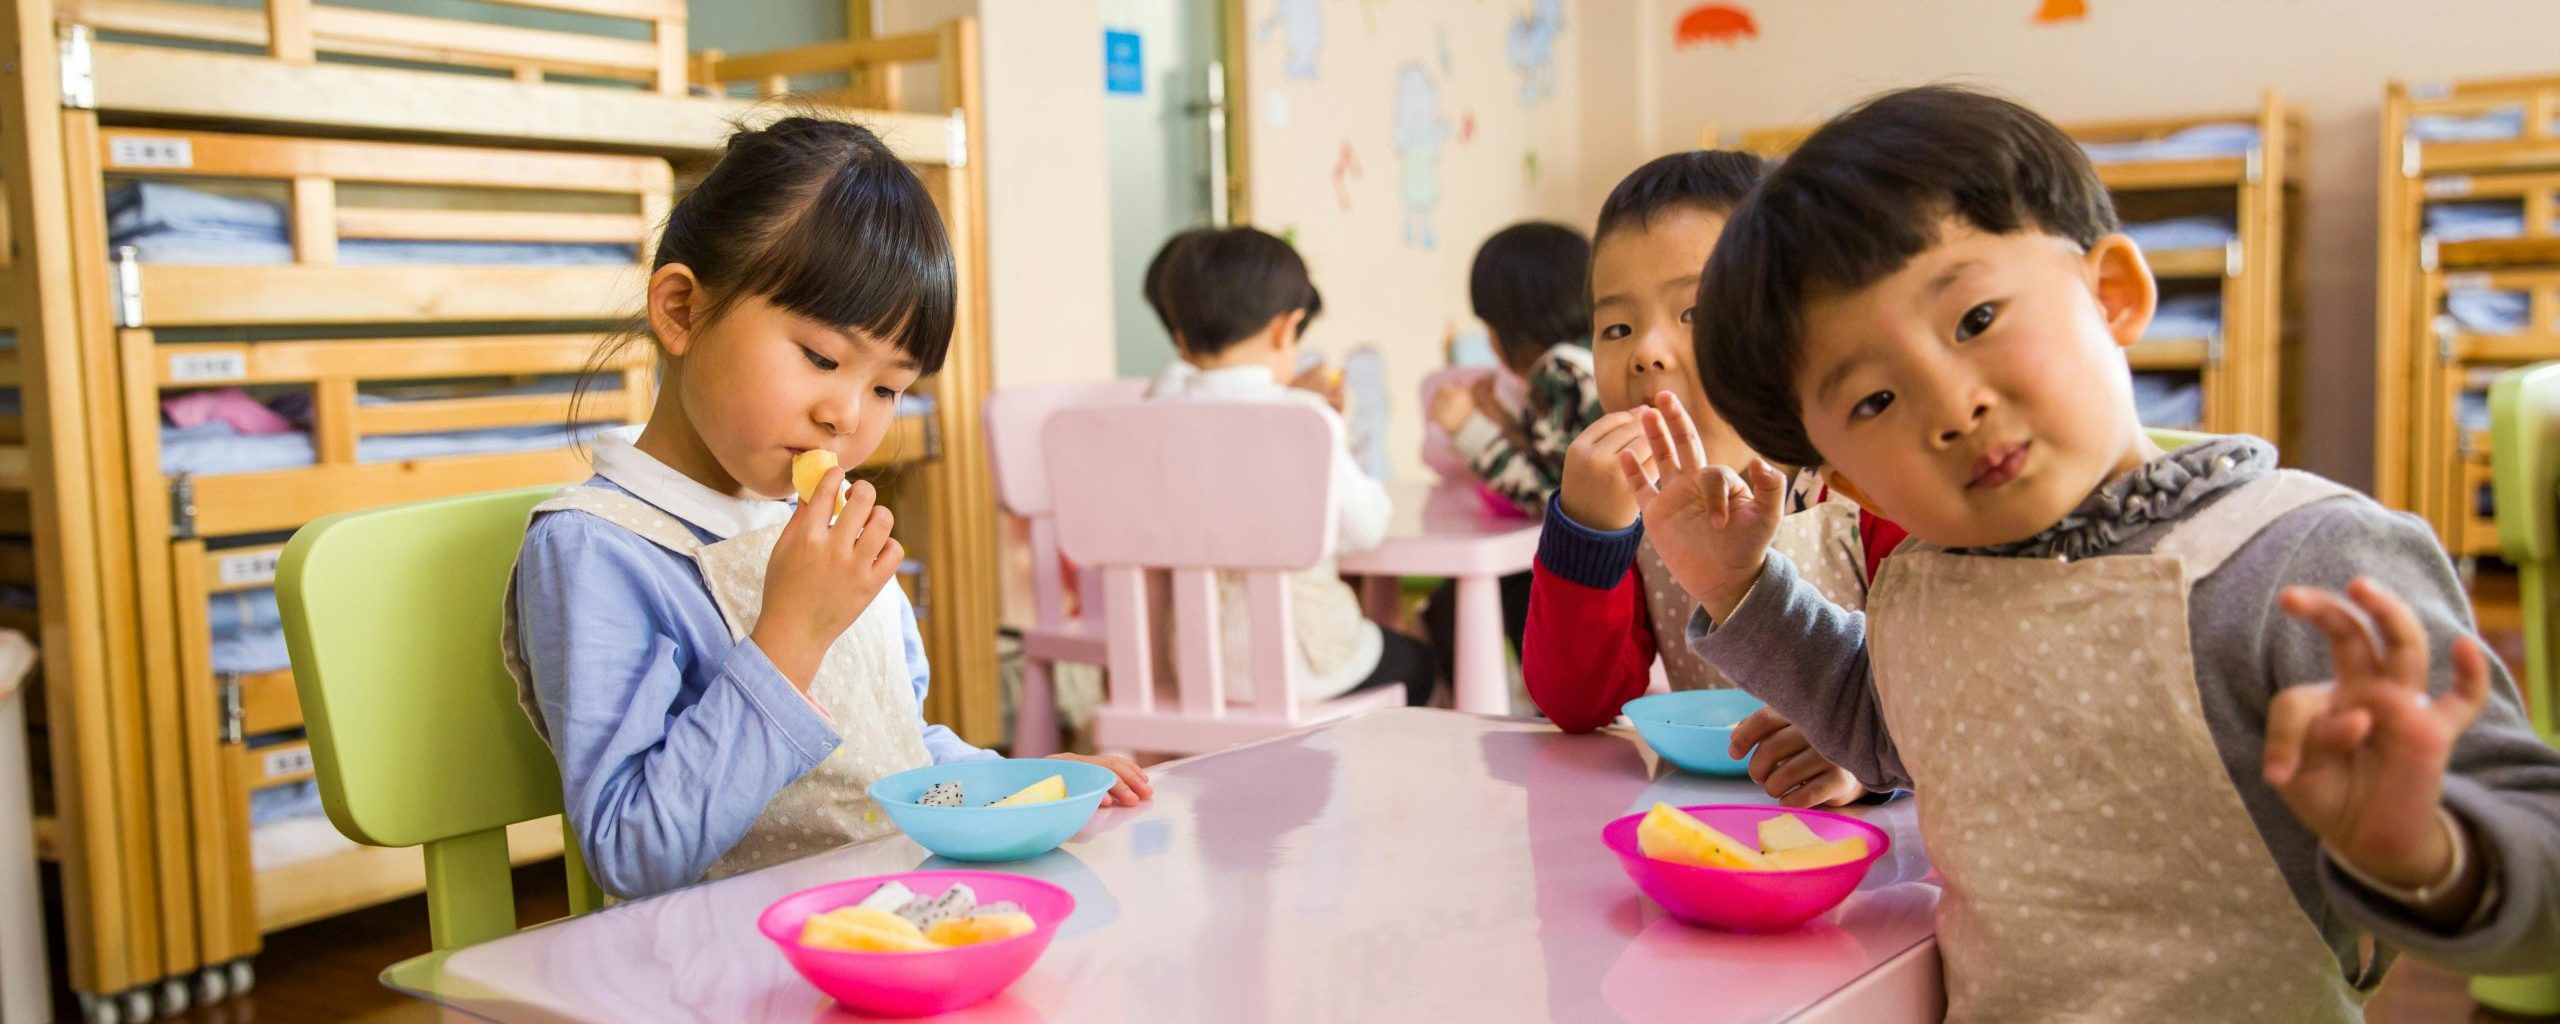 Children in classroom with food